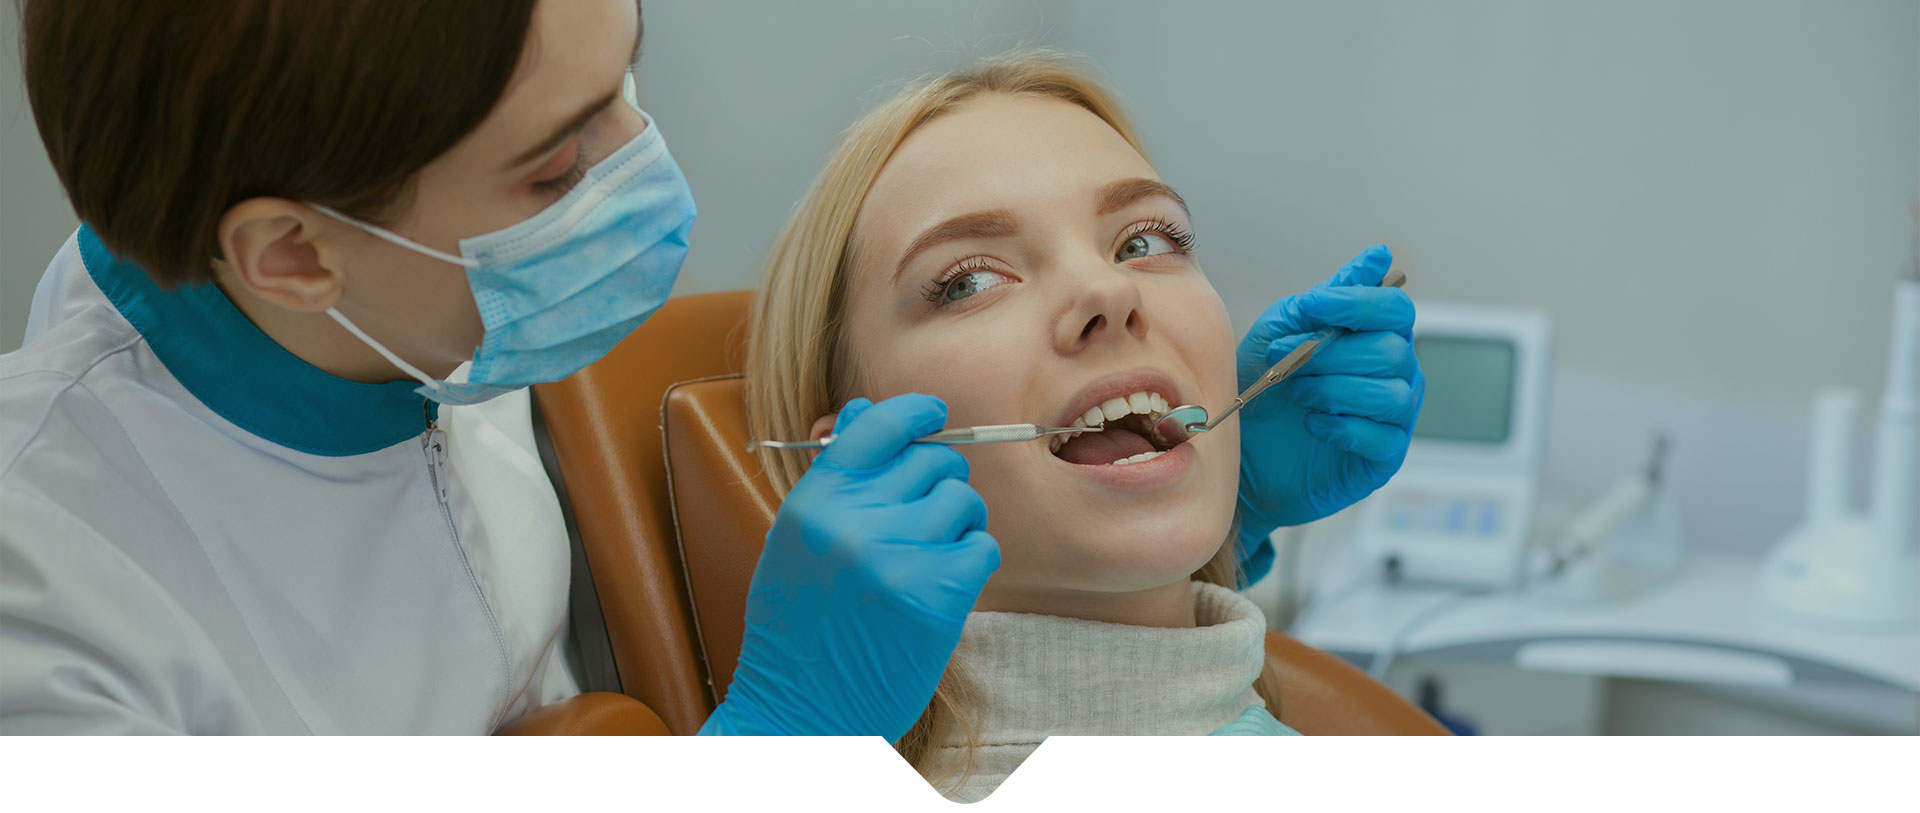 A female patient getting dental examination